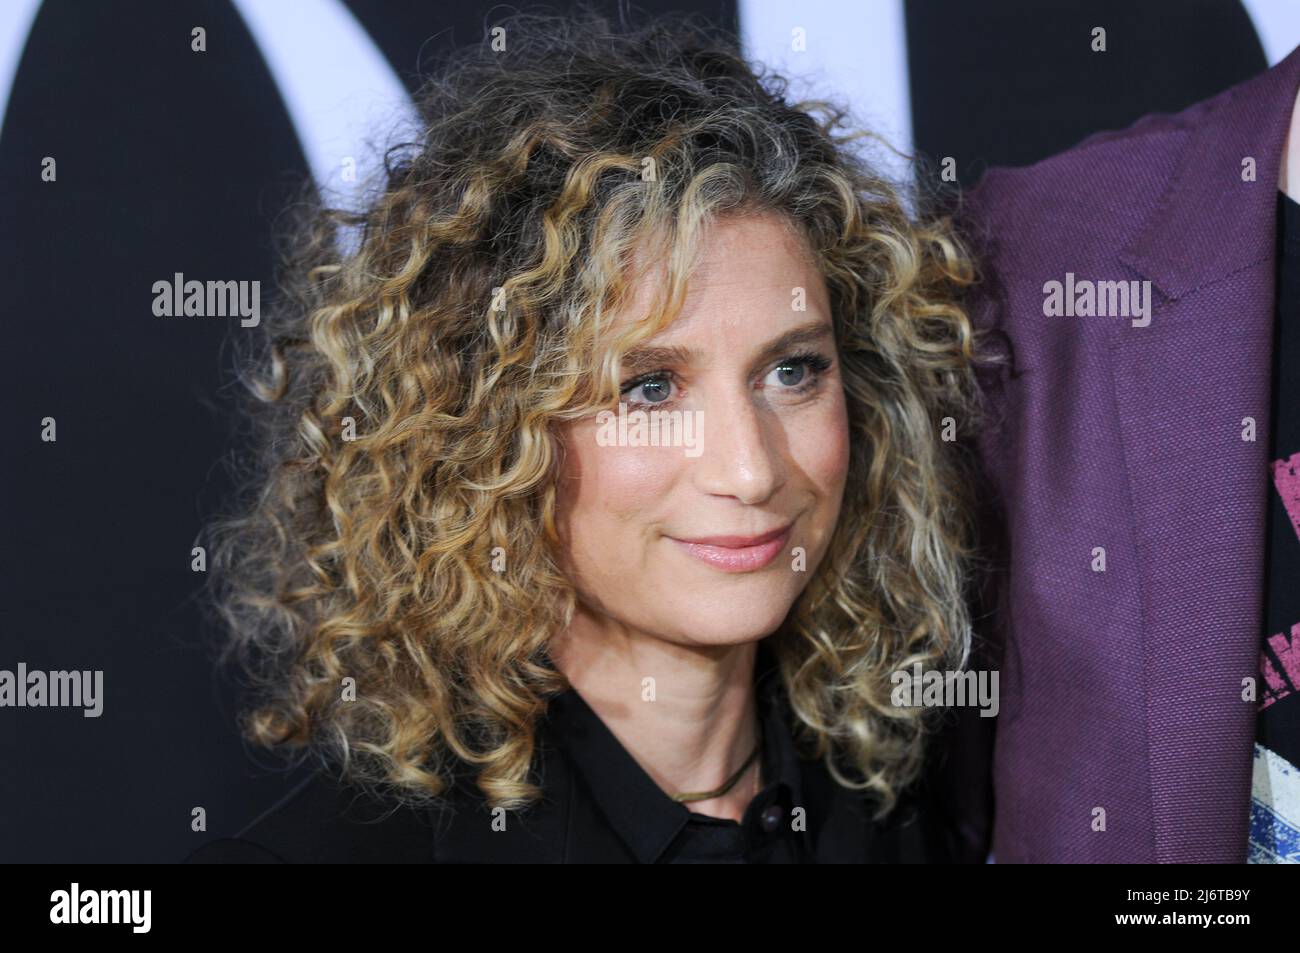 Sara Bernstein attends the "We Feed People' screening at the SVA Theater in New York City. (Photo by Efren Landaos / SOPA Images/Sipa USA) Stock Photo